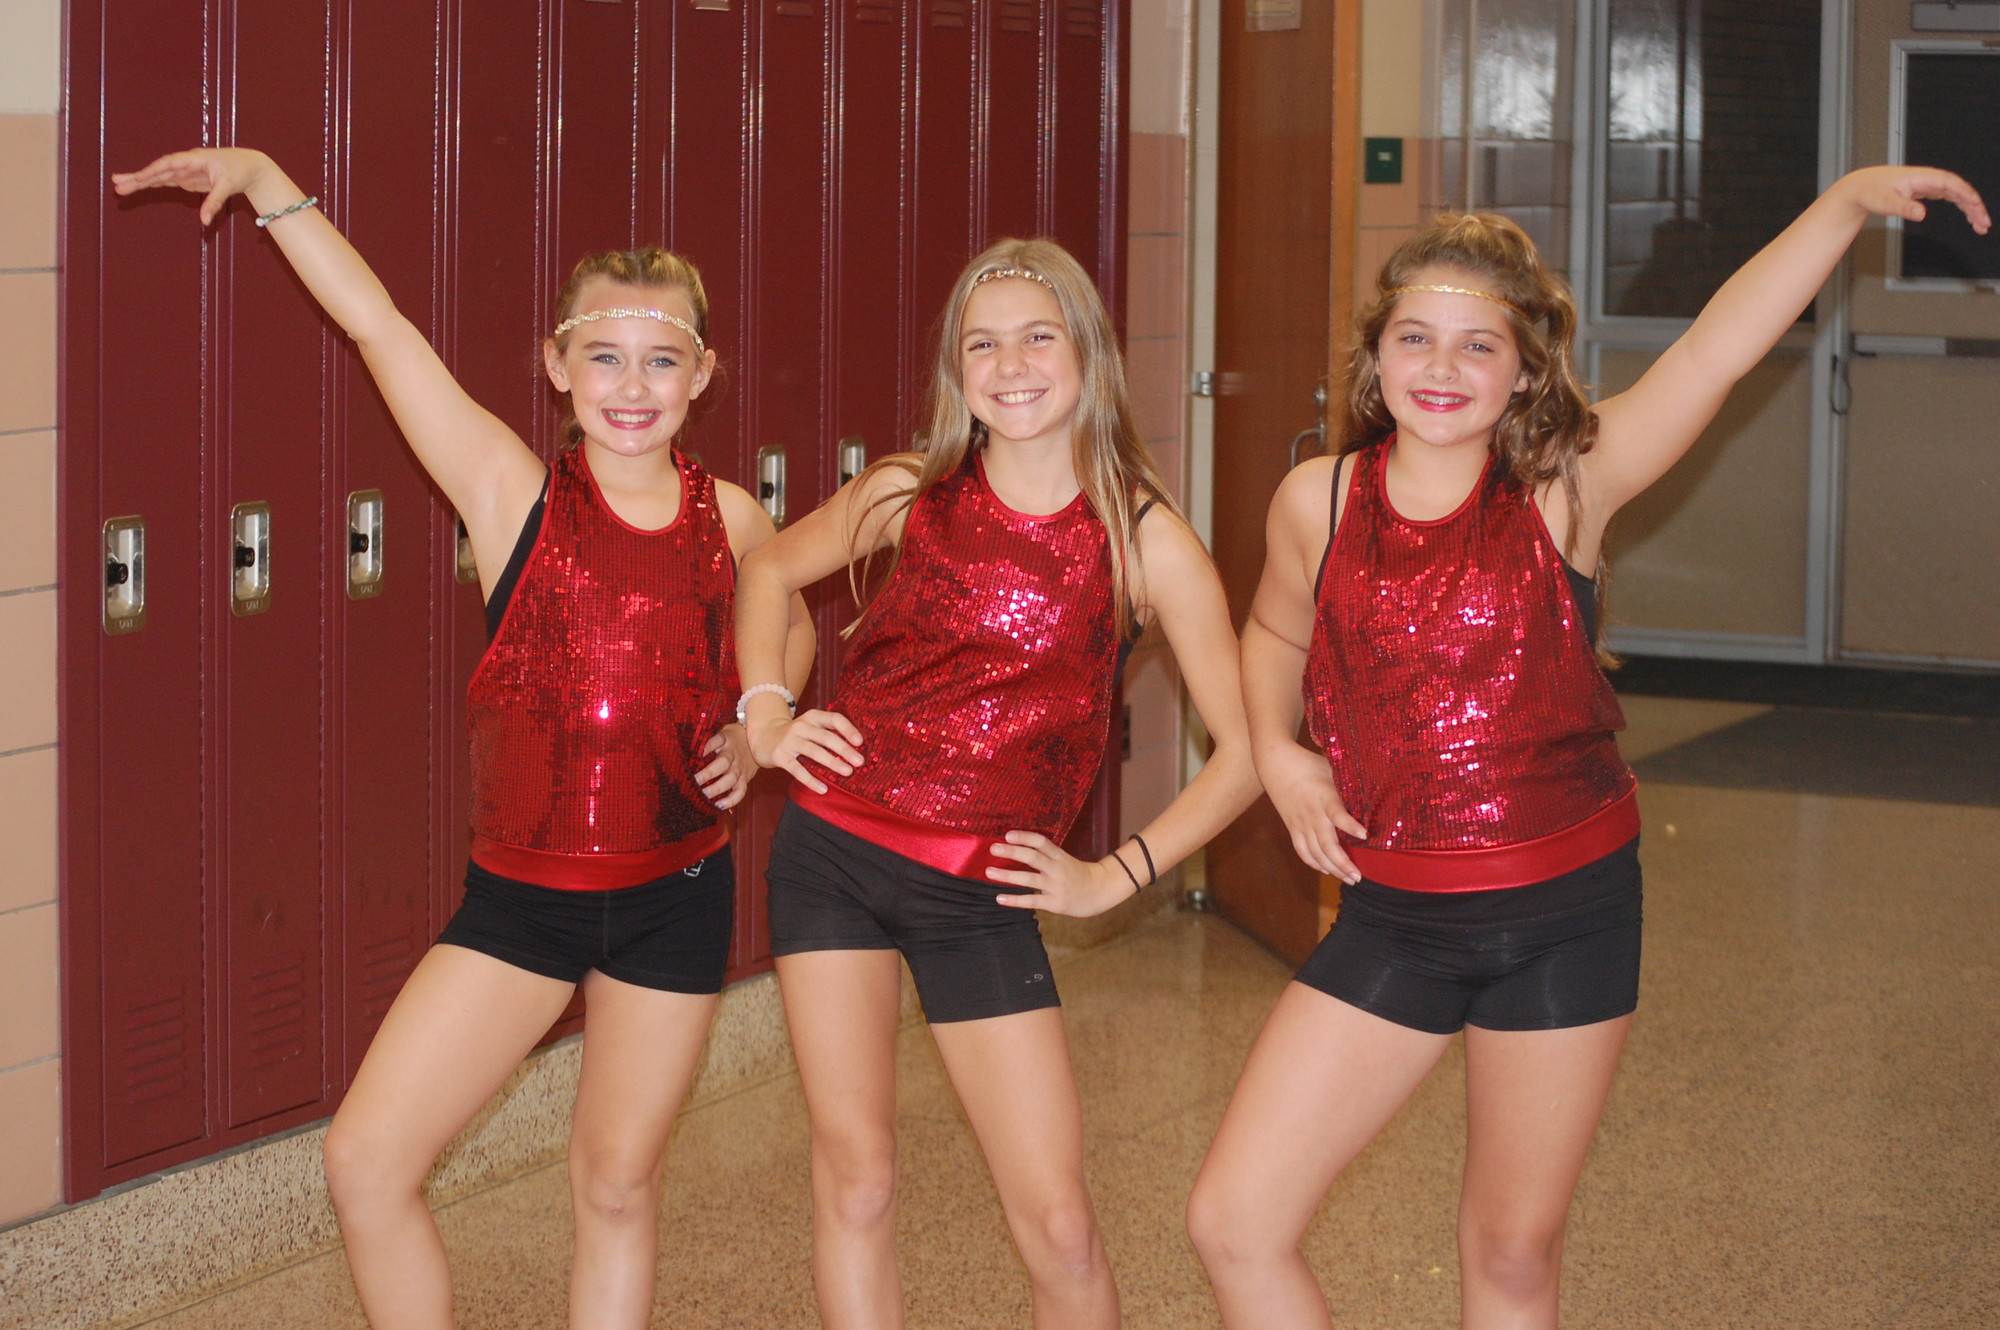 Kim Nagengast, Brooke Surace and Sarah Weinert entertained the crowd with a dance.